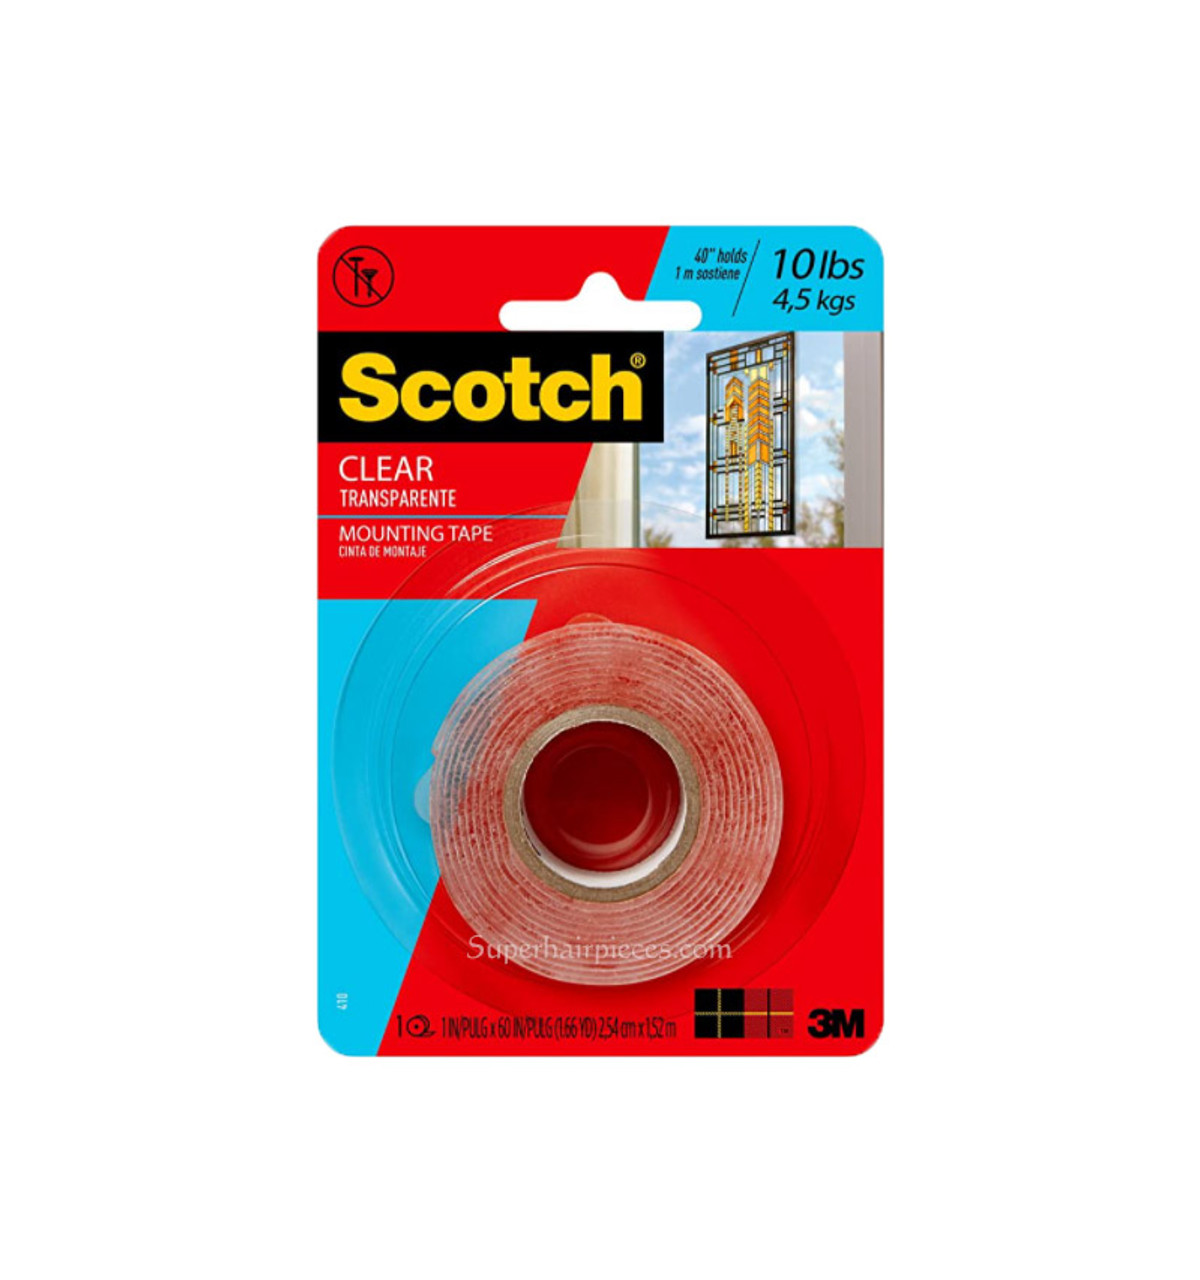 Buy 3M Scotch Clear Mounting Tape, Double-Sided Permanent Tape